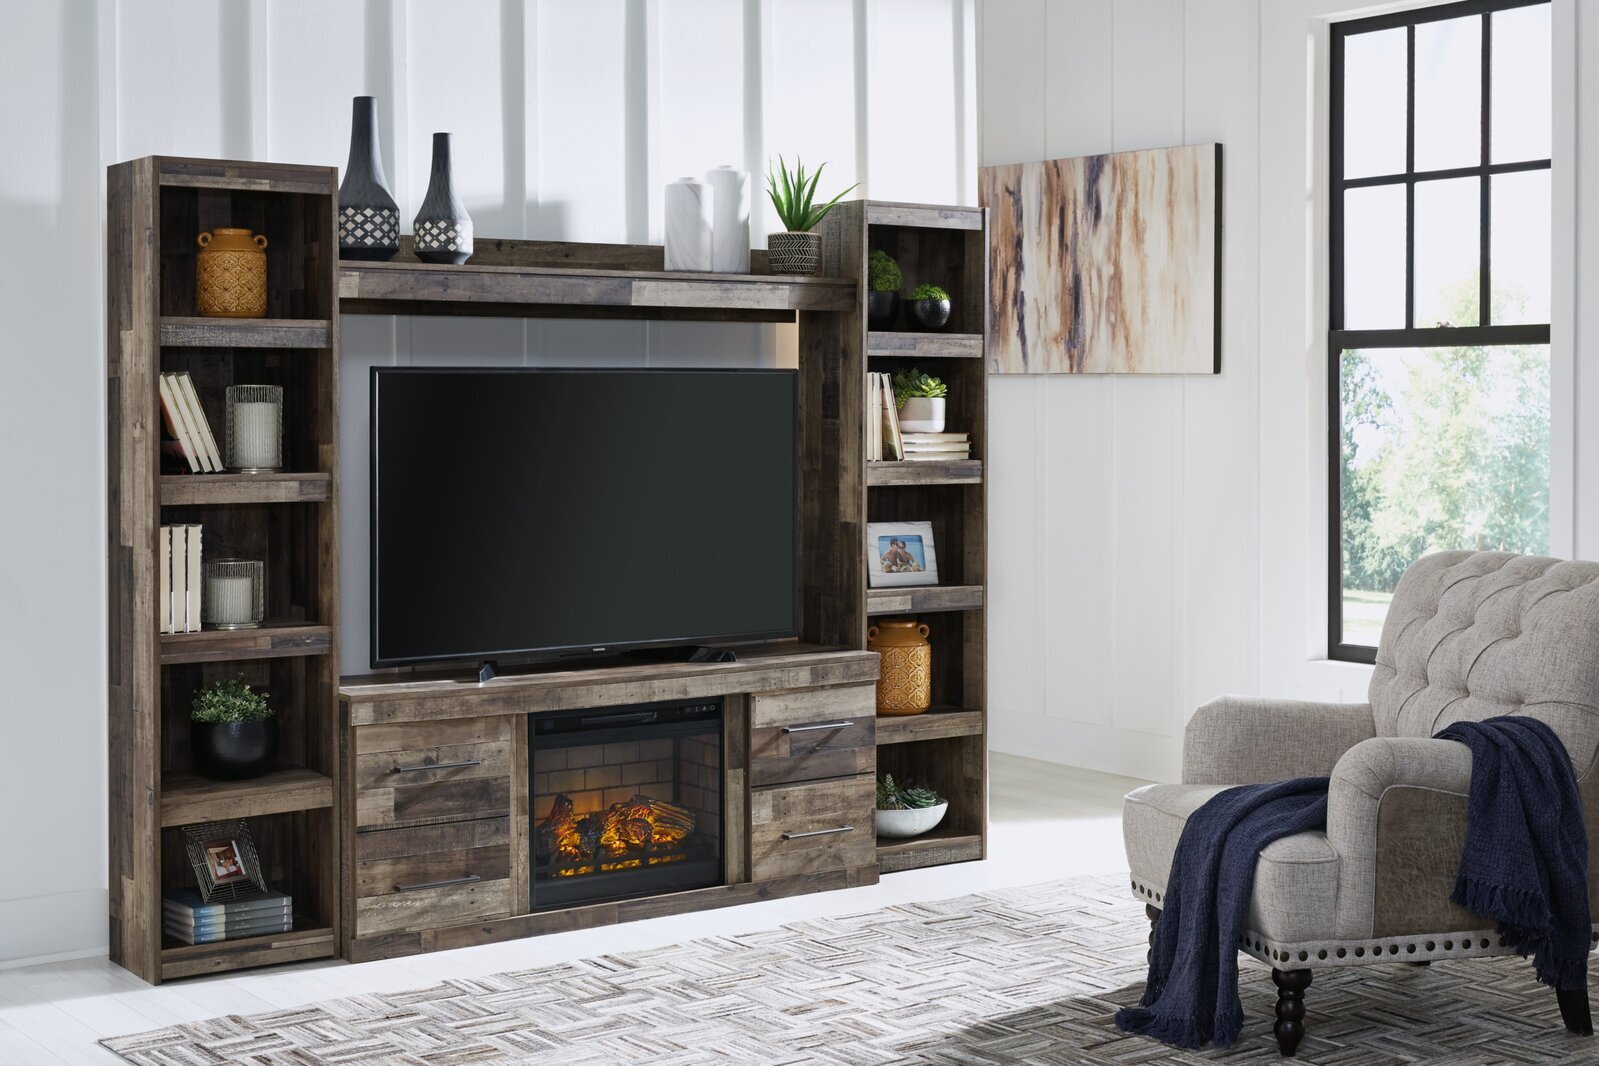 Entertainment Center With Bookshelves and Electric Fireplace